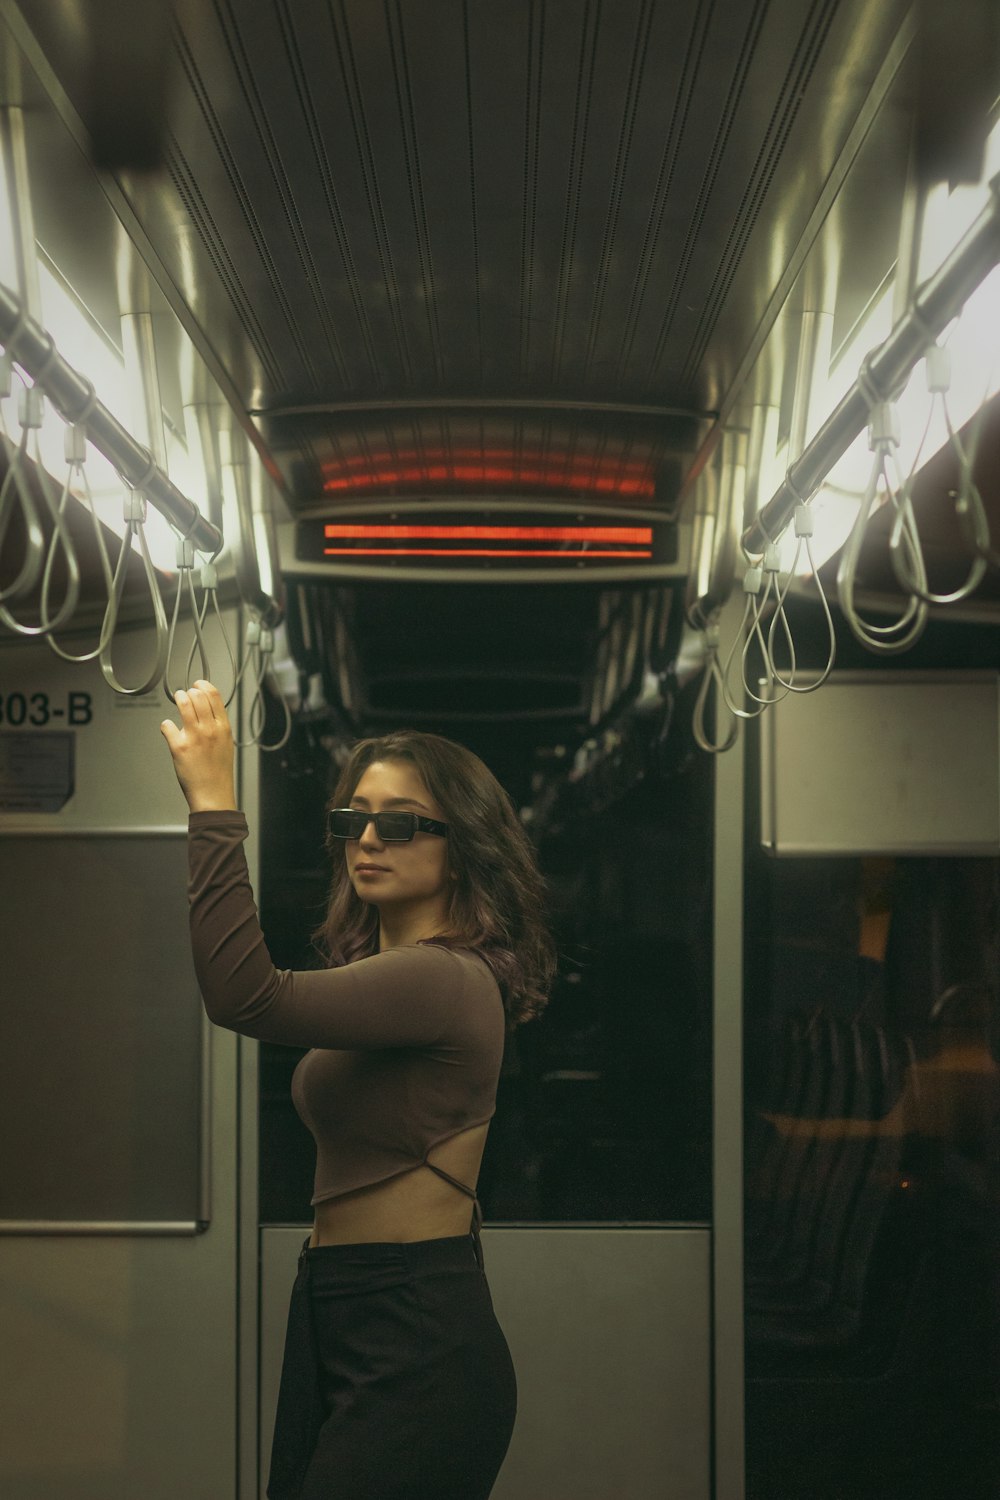 a woman standing on a train holding onto the lights